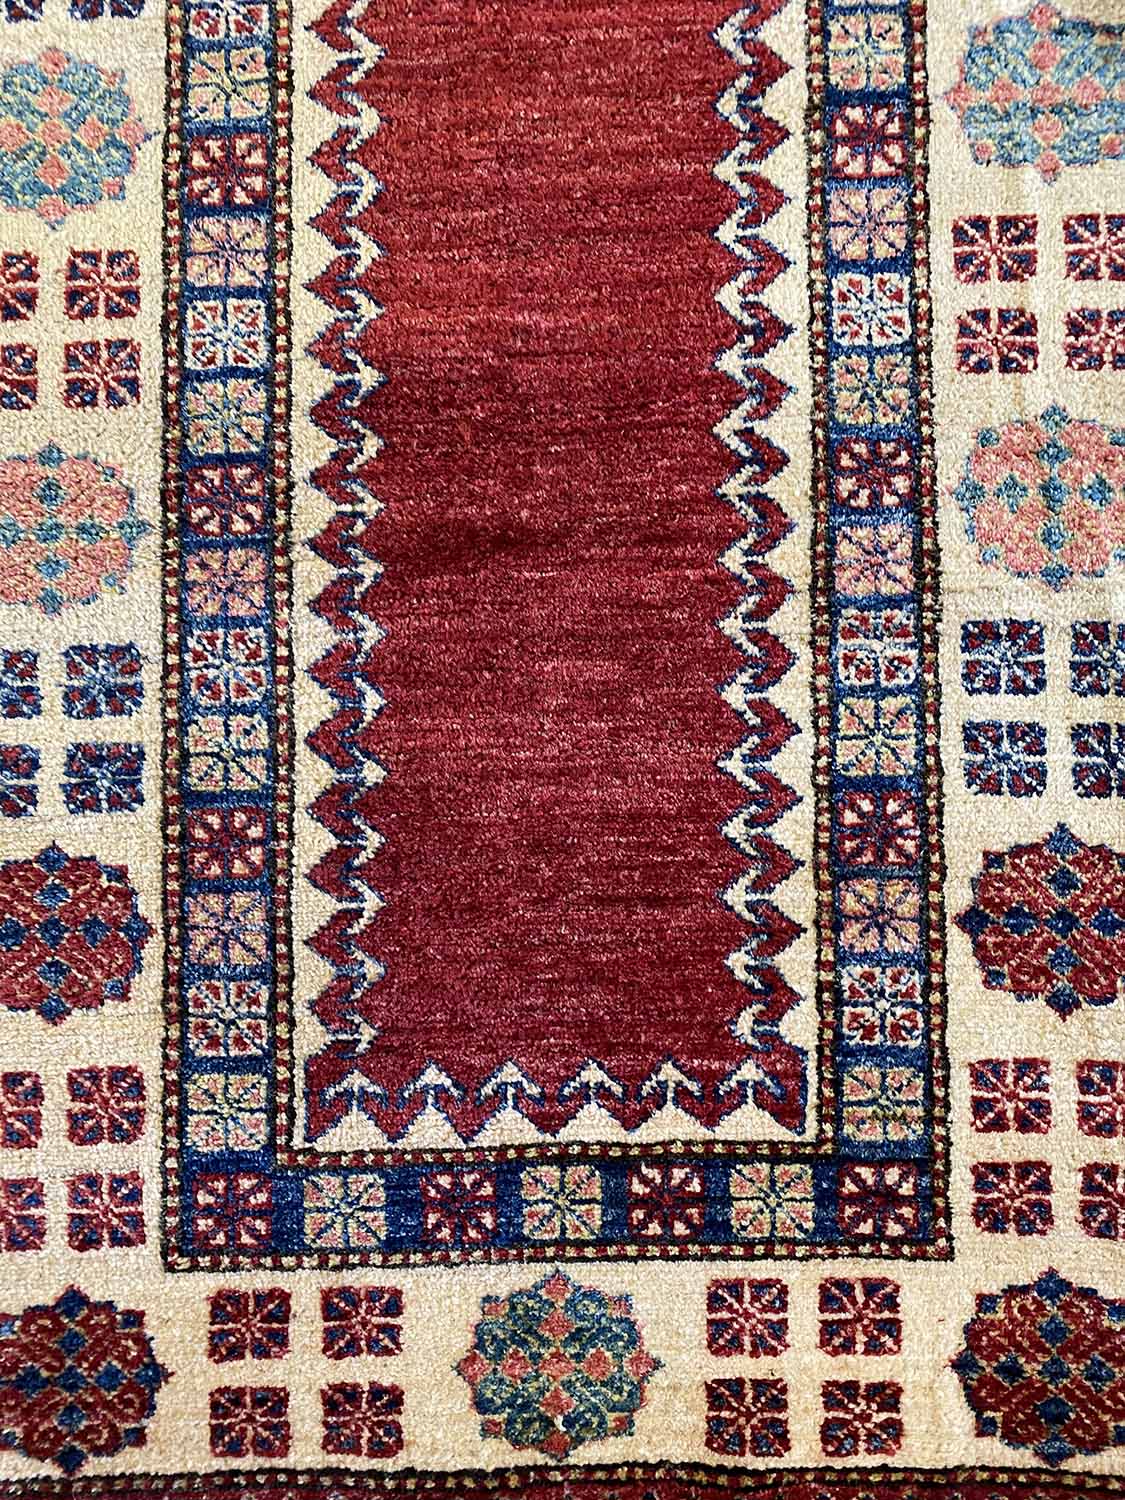 KAZAK RUNNER, 360cm x 90cm, open field within geometric bands and borders. - Image 2 of 3